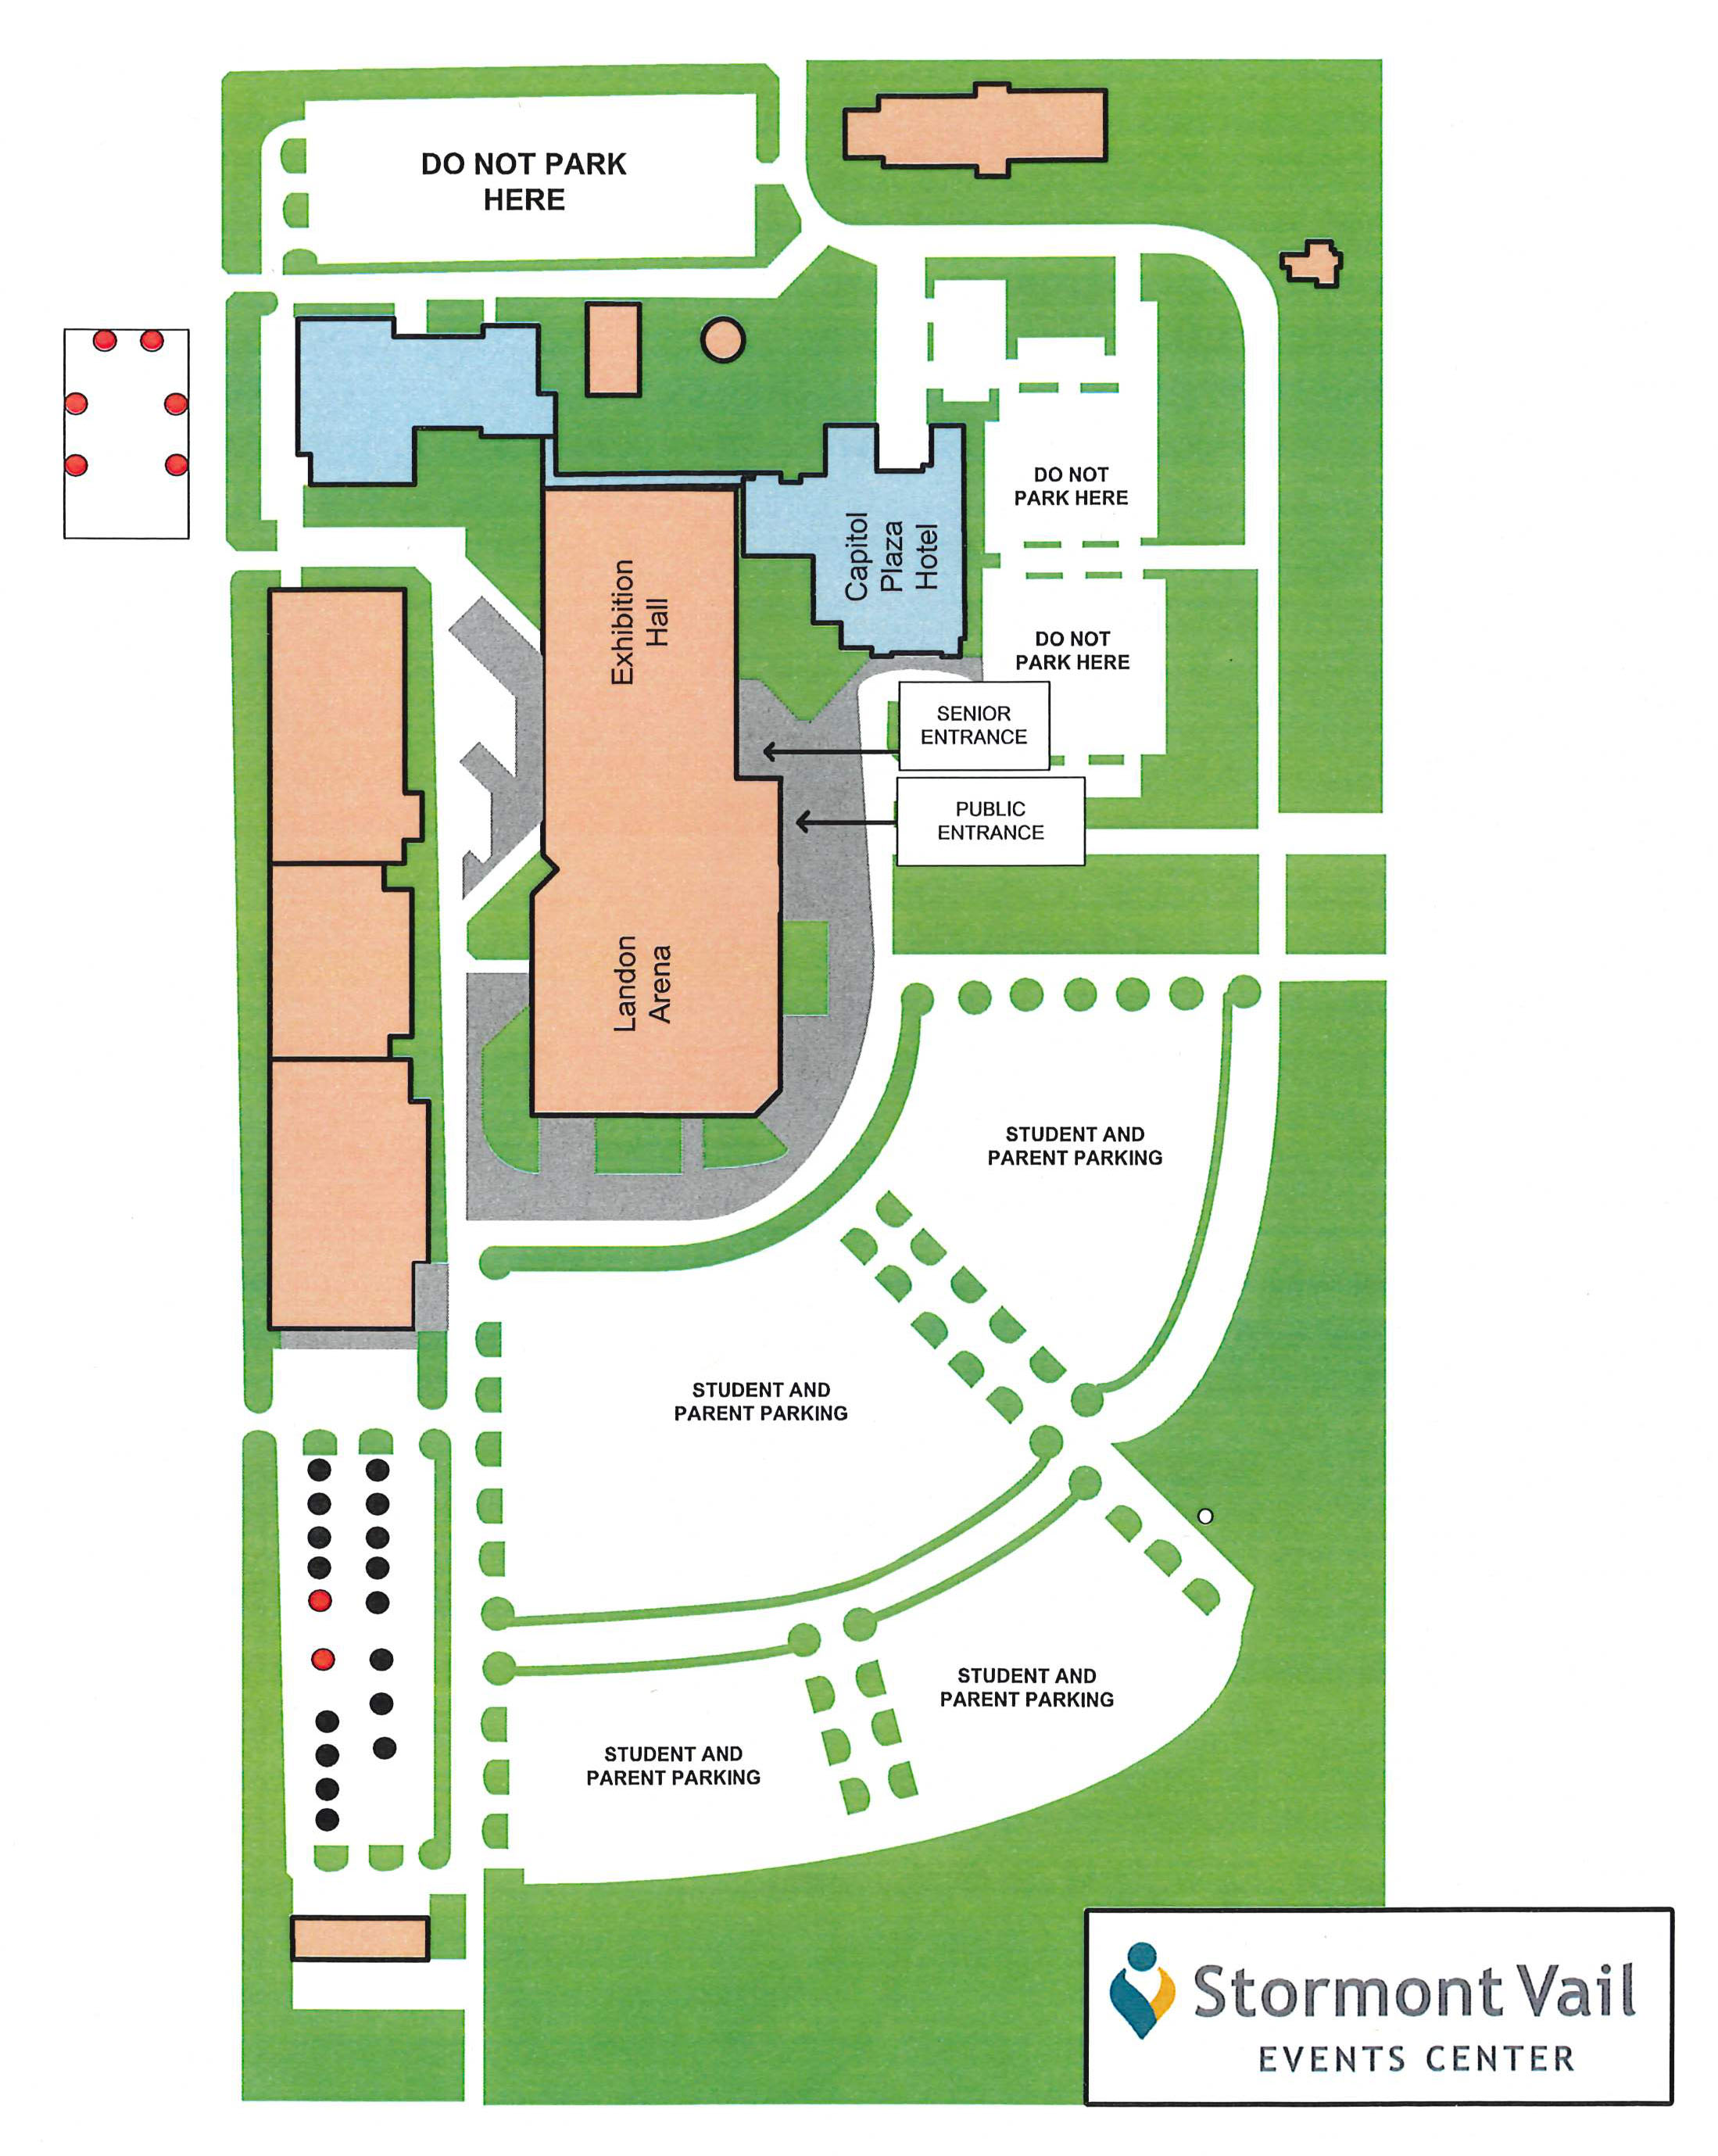 Events Center map